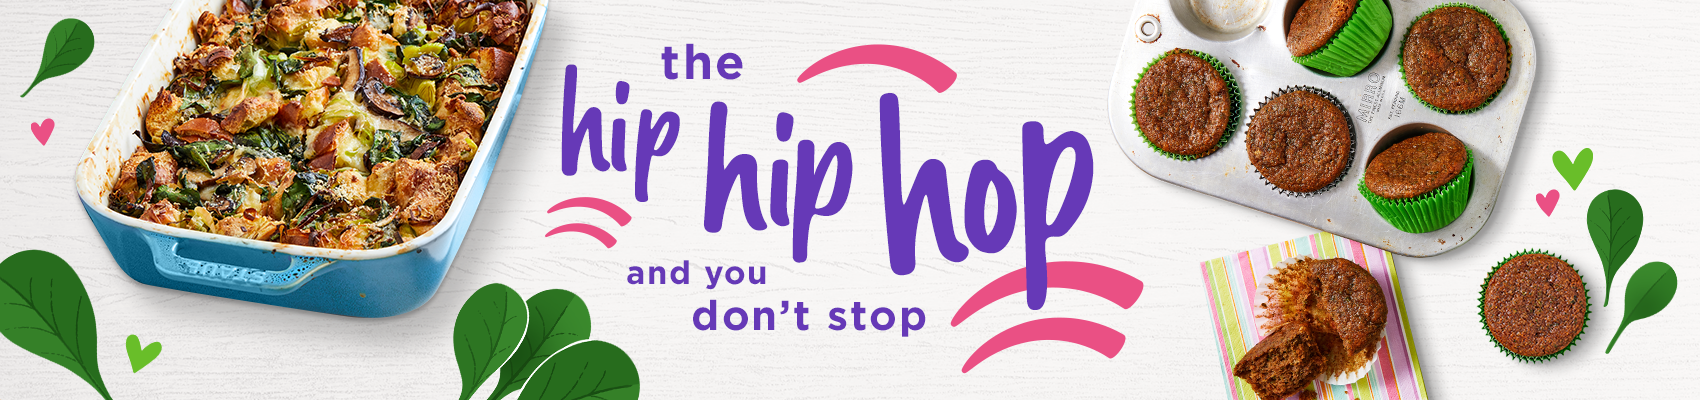 The hip hip hop and you don't stop